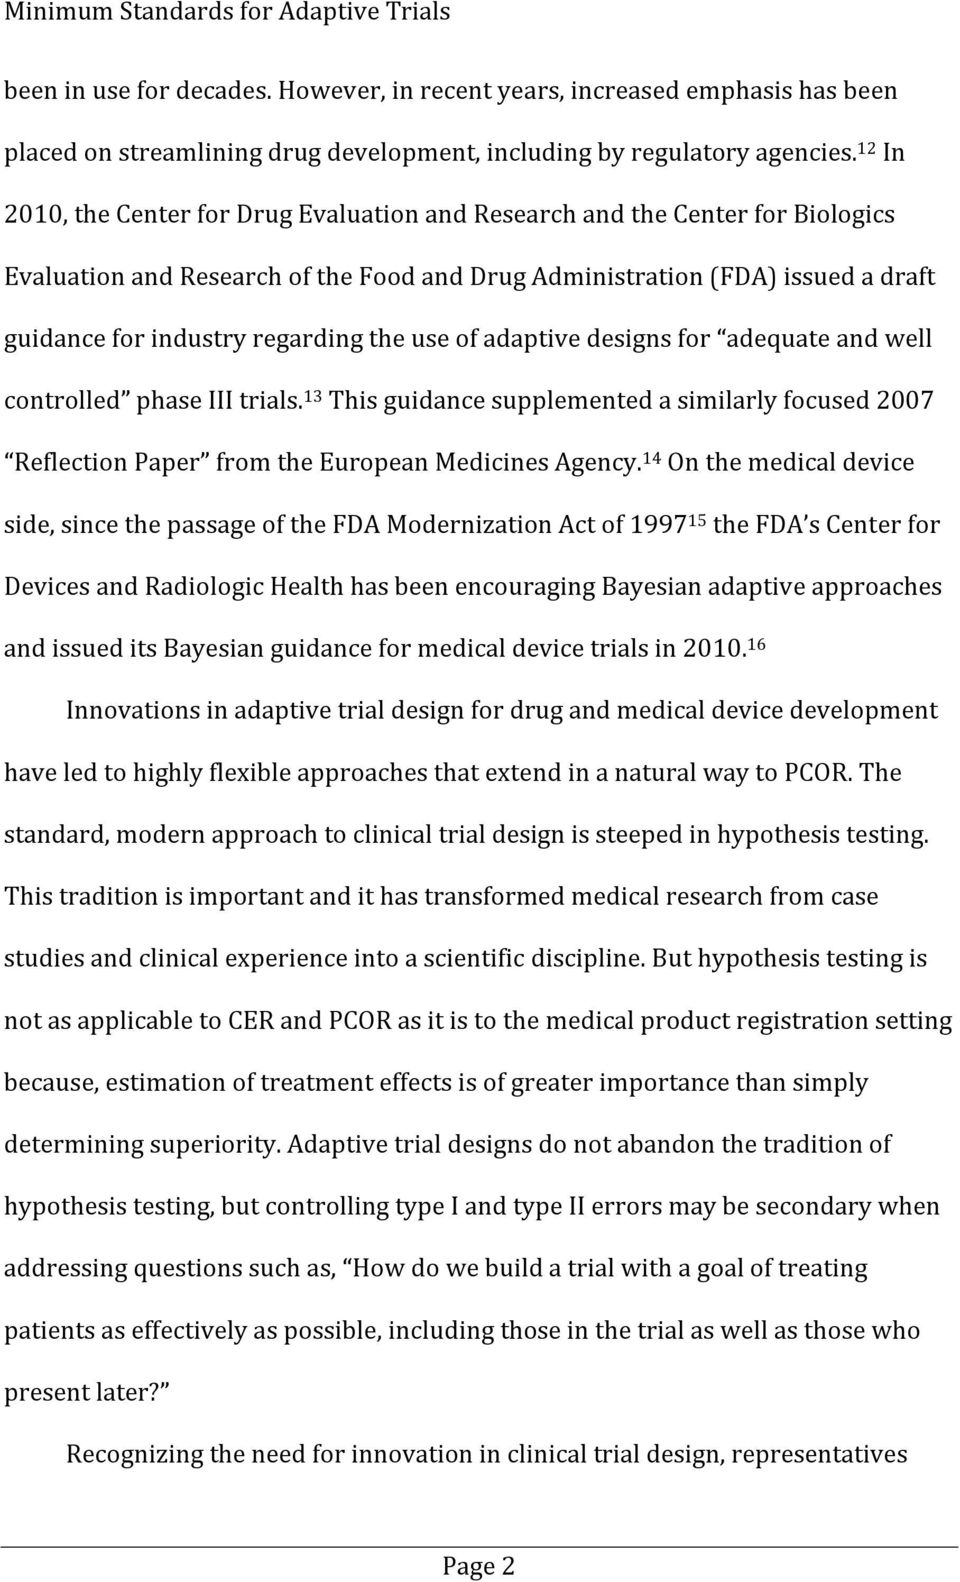 the use of adaptive designs for adequate and well controlled phase III trials. 13 This guidance supplemented a similarly focused 2007 Reflection Paper from the European Medicines Agency.